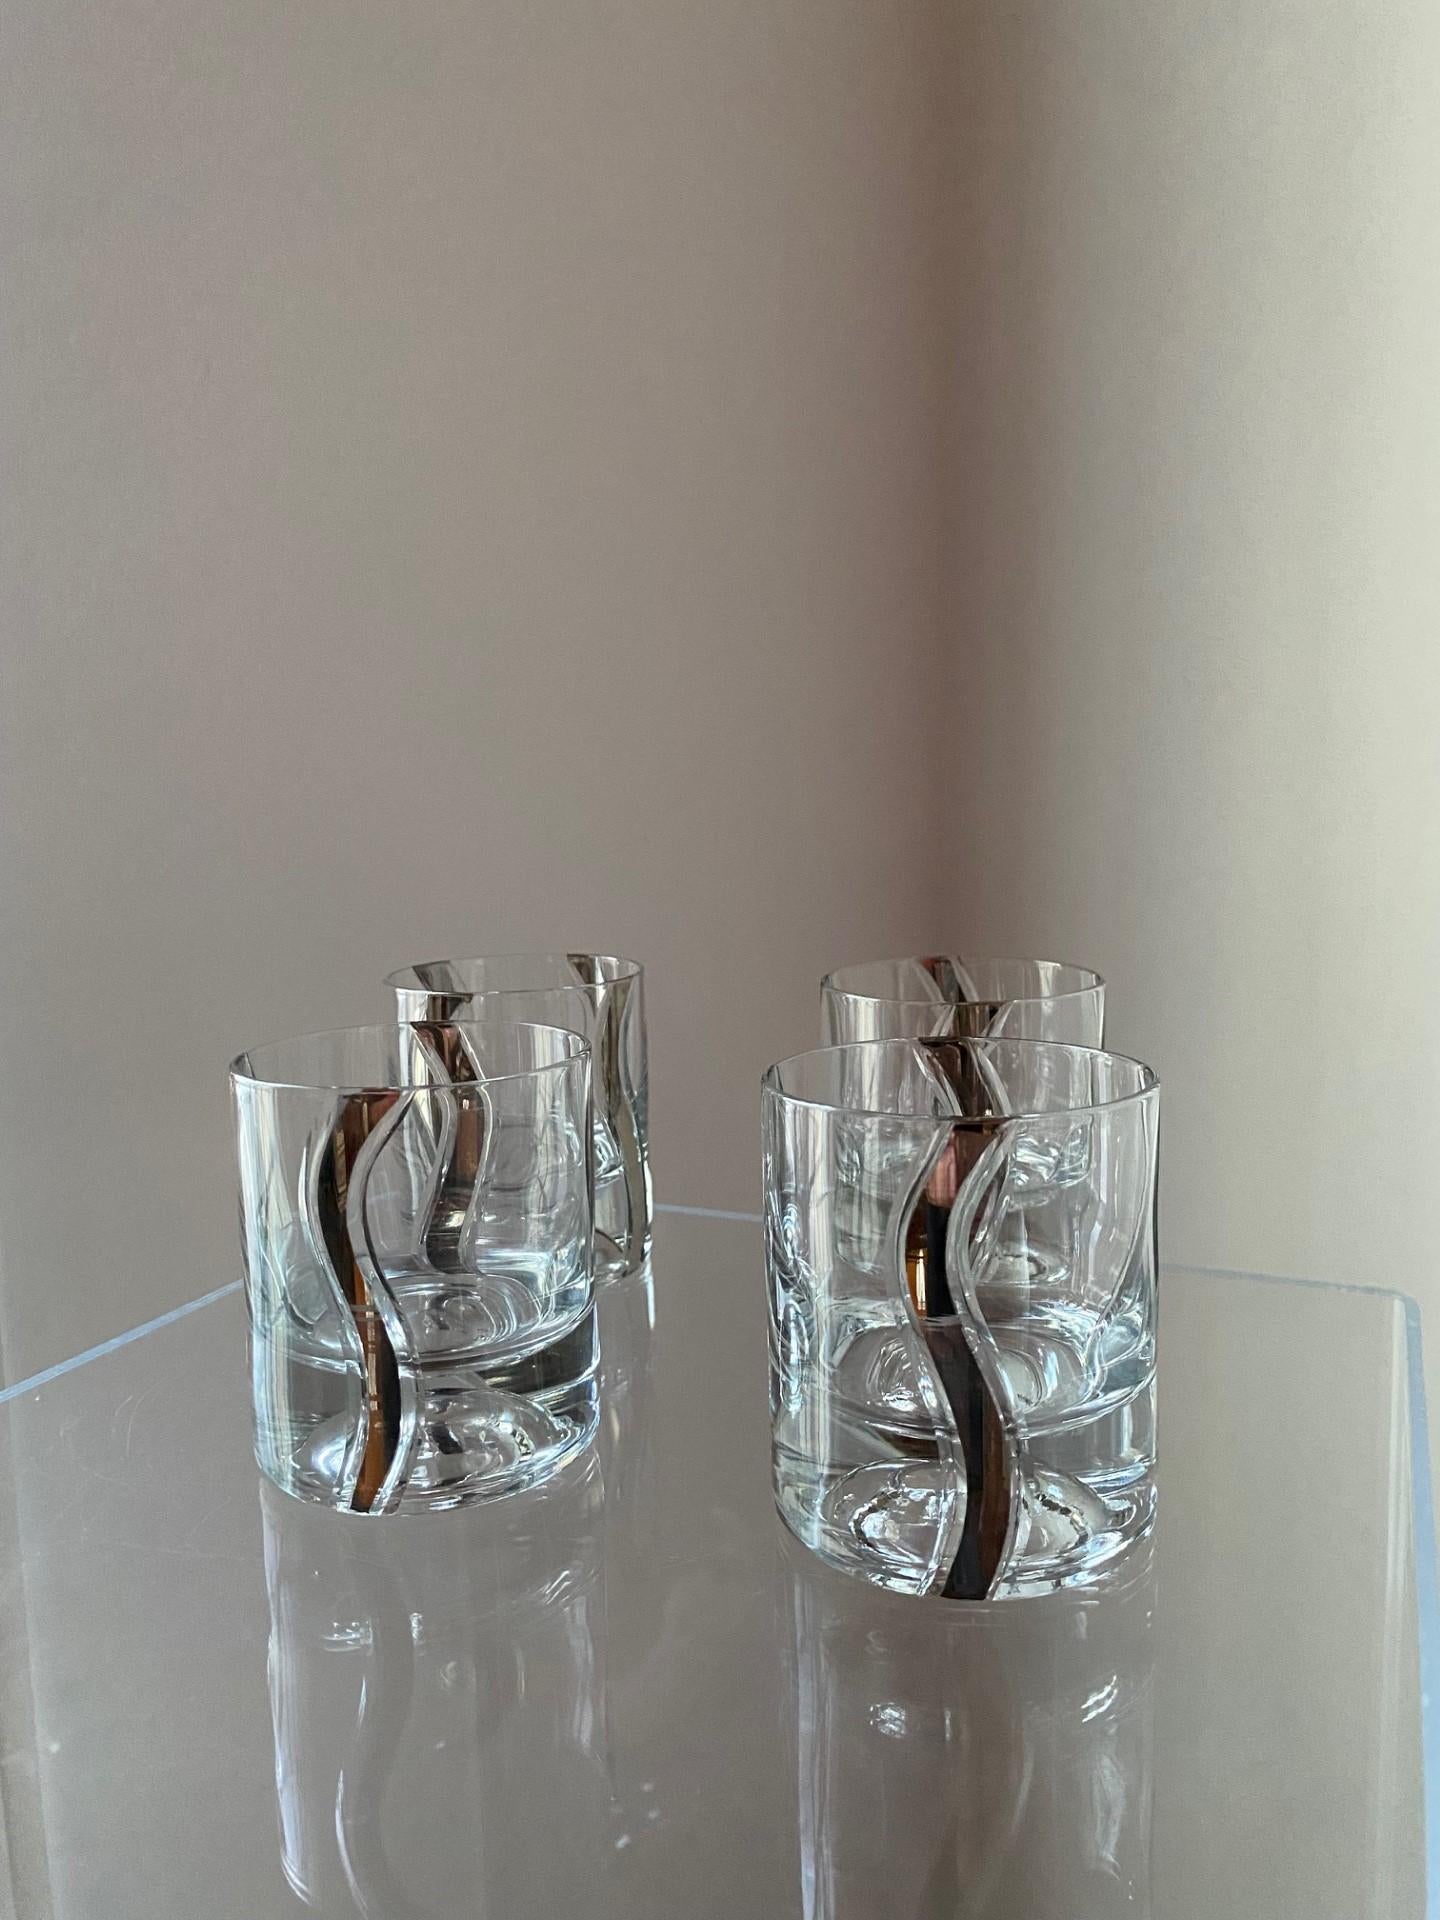 Beautiful set of 4 old fashioned glasses.  These vintage, mid-century beauties dazzled with sparkle and platinum shimmer.  Each vintage glass piece has a solid base, with platinum ribbon designs that ondulate from top to bottom creating a chic and